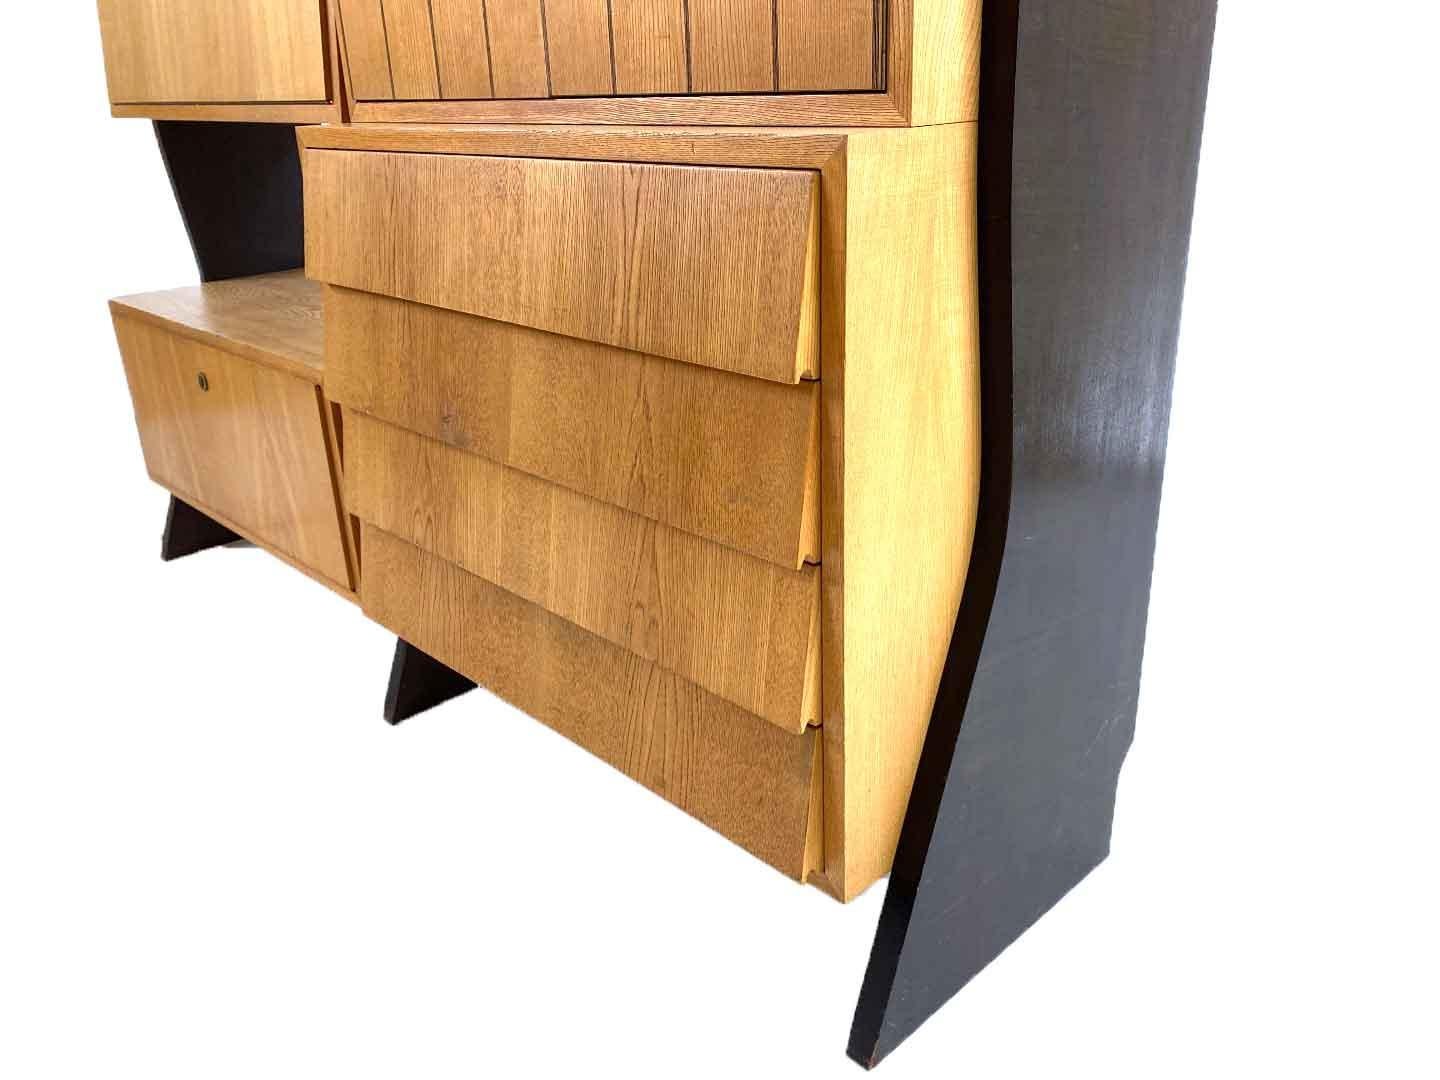 Vintage Modernist Wall Unit with Desk by Erich Stratmann for Idee Möbel, 1959 For Sale 1